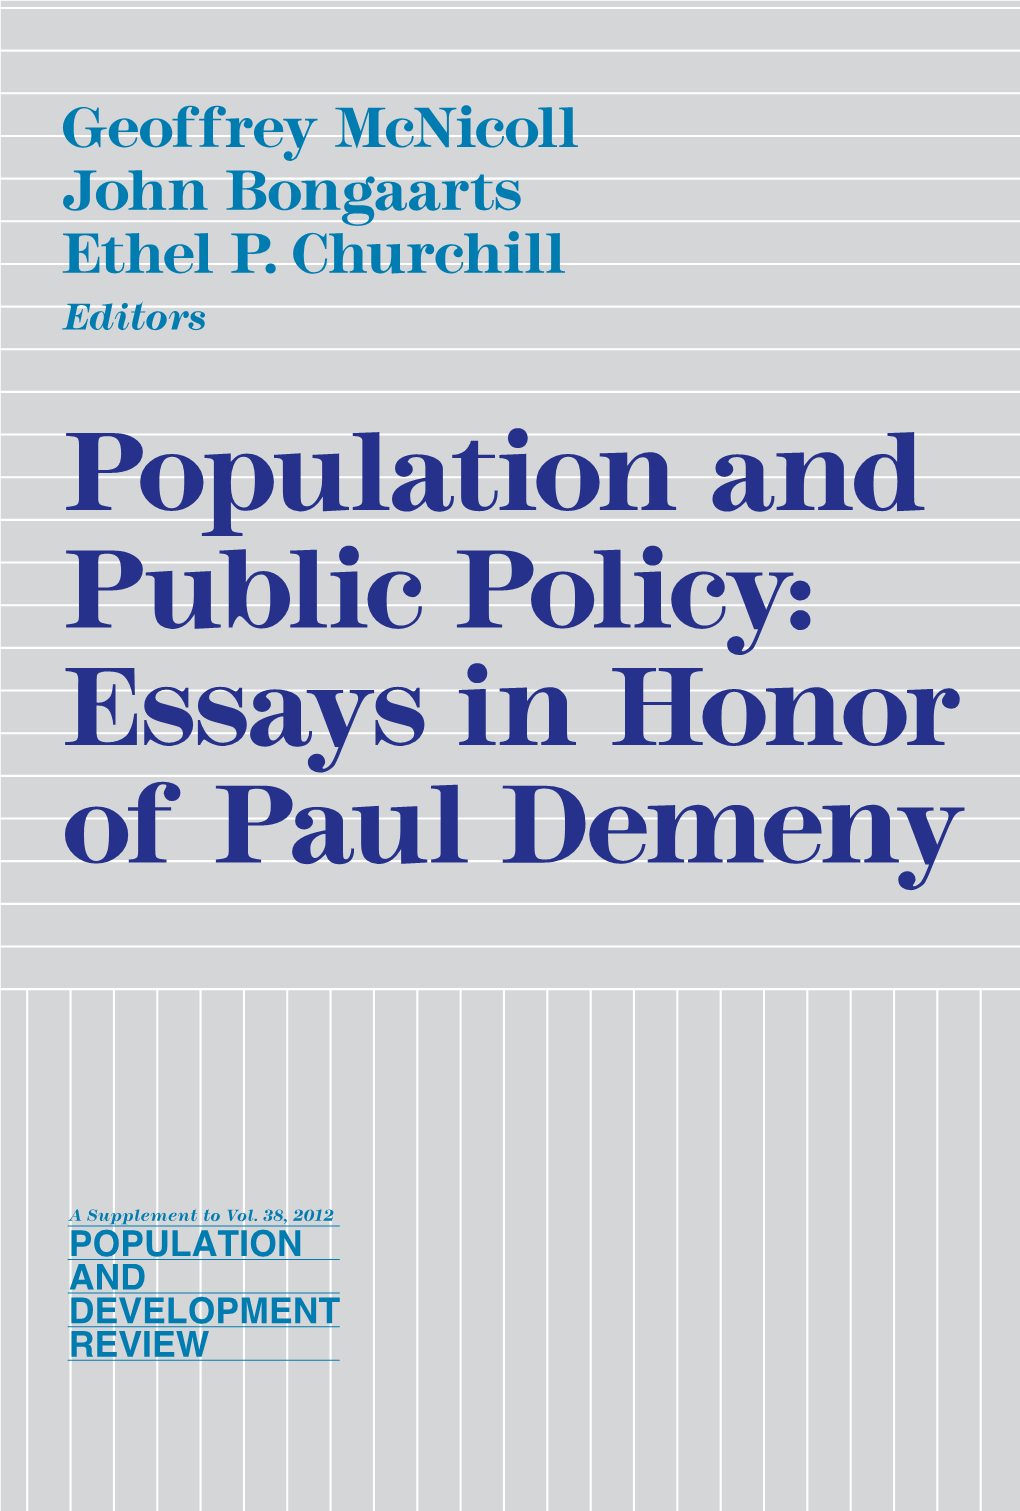 Population and Public Policy: Essays in Honor of Paul Demeny